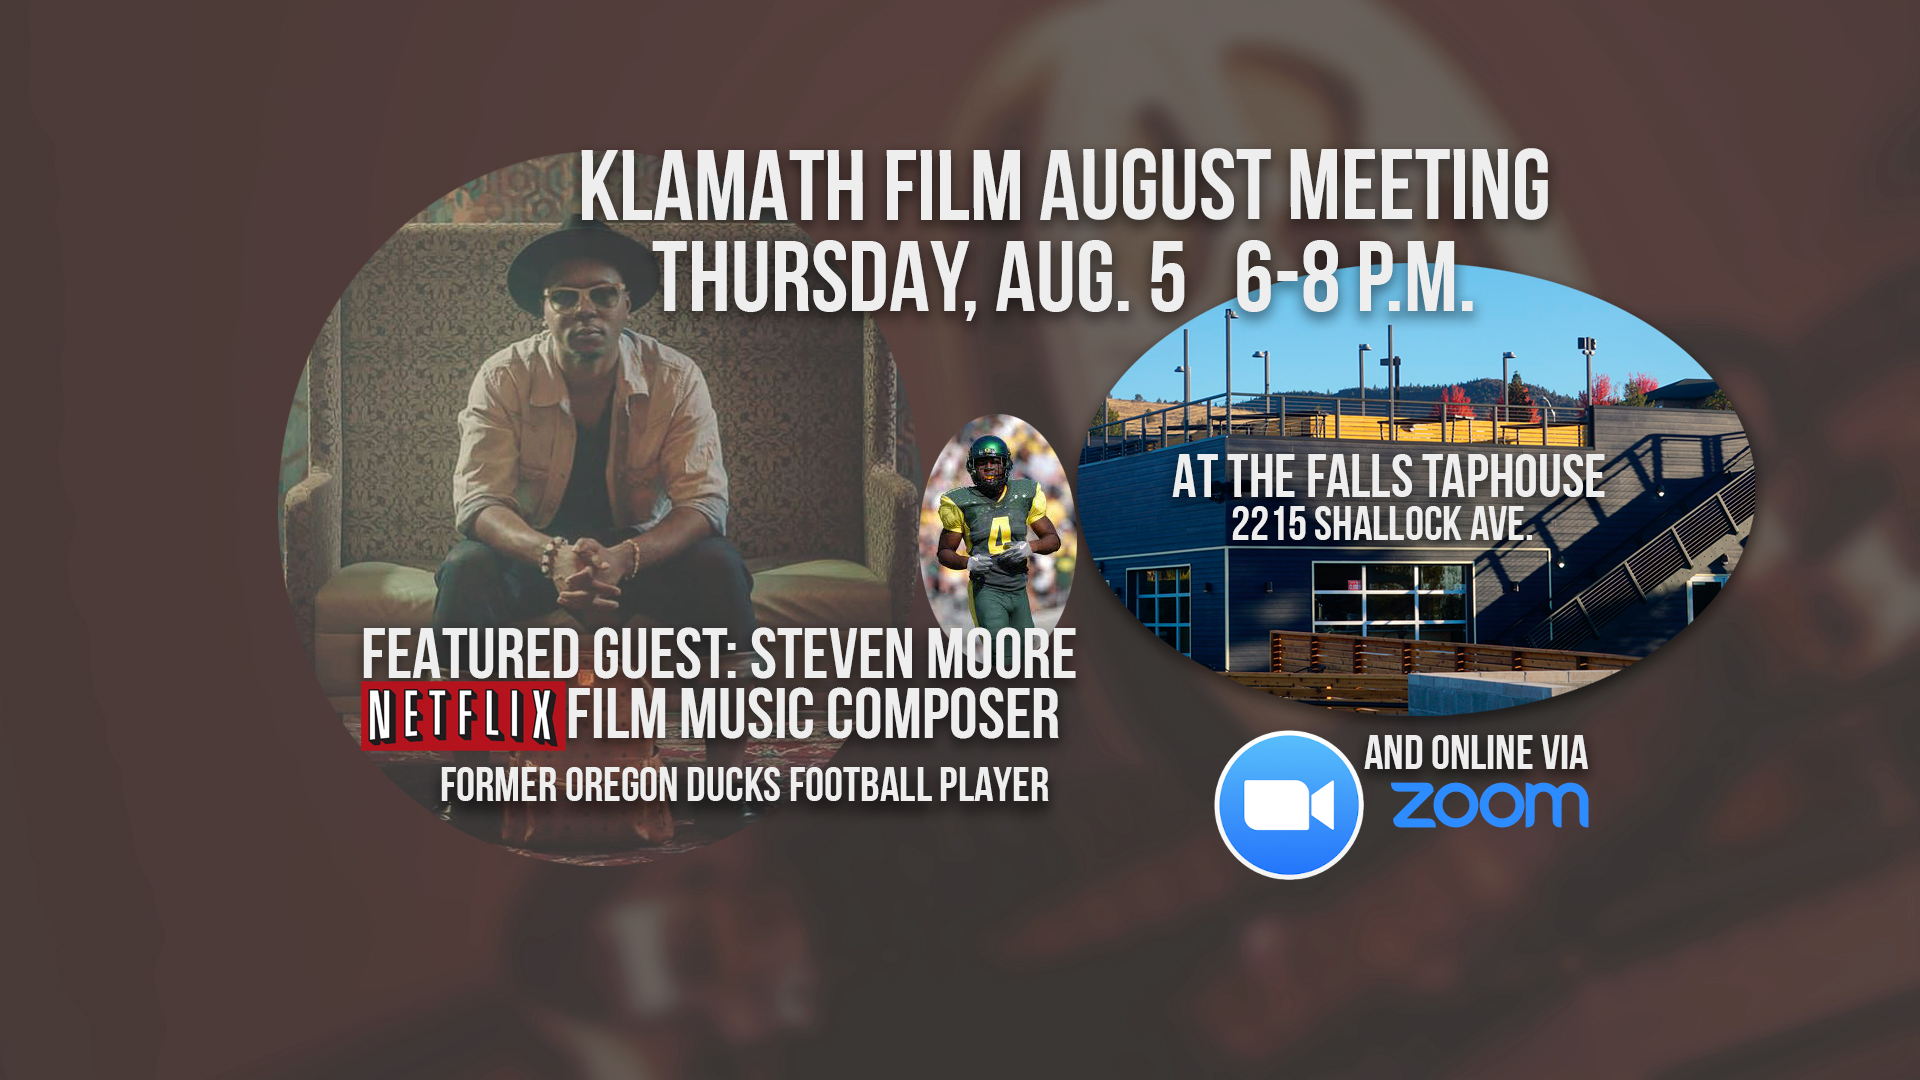 August member meeting at the Falls Taphouse features talk with Netflix music composer Steven Moore